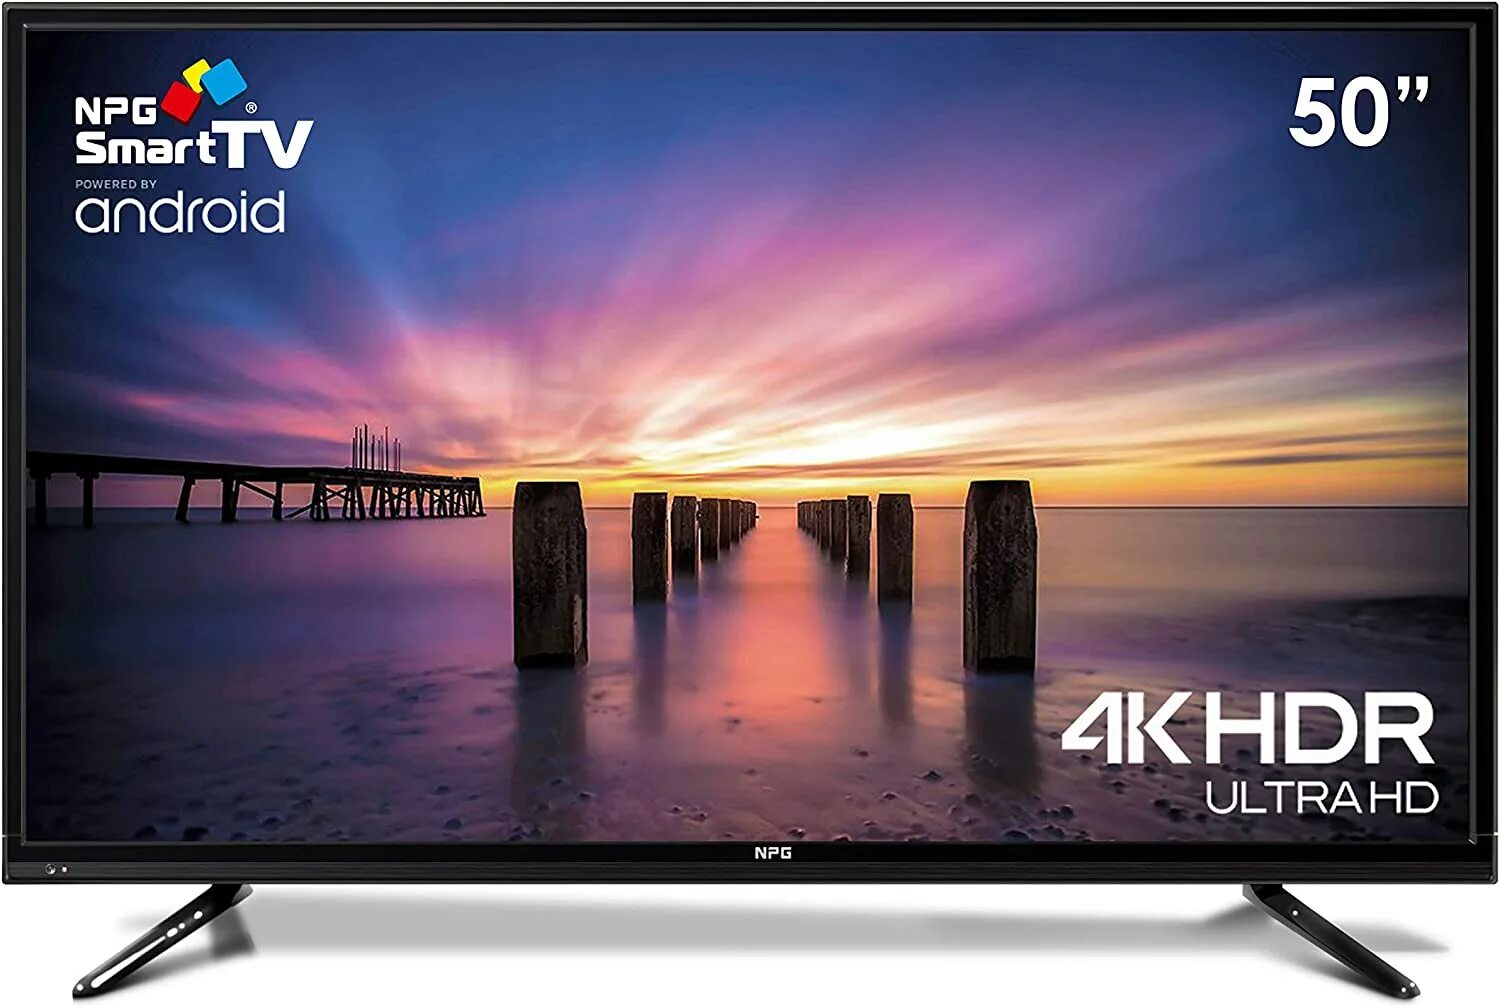 Smart TV 32g7000. Sony Smart TV Android. Телевизор Smart TV Android. Телевизоры настенные смарт ТВ.